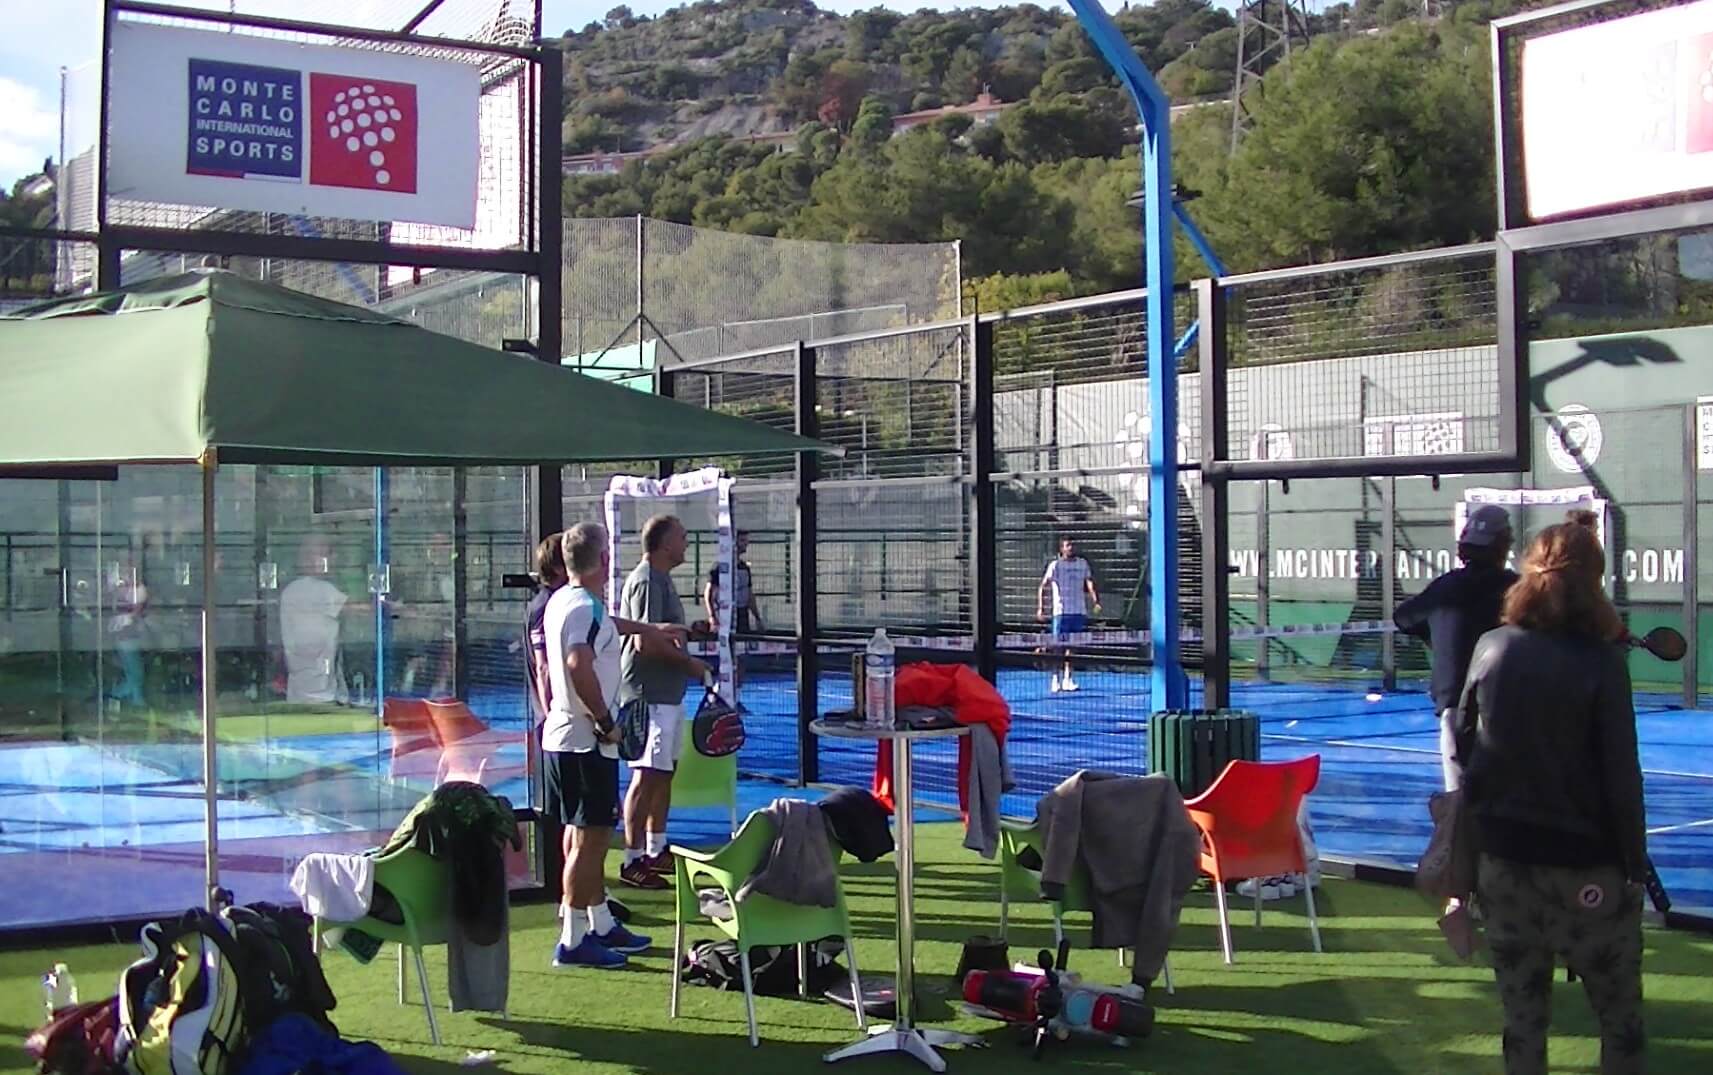 Be ready for the Open of Padel Sun